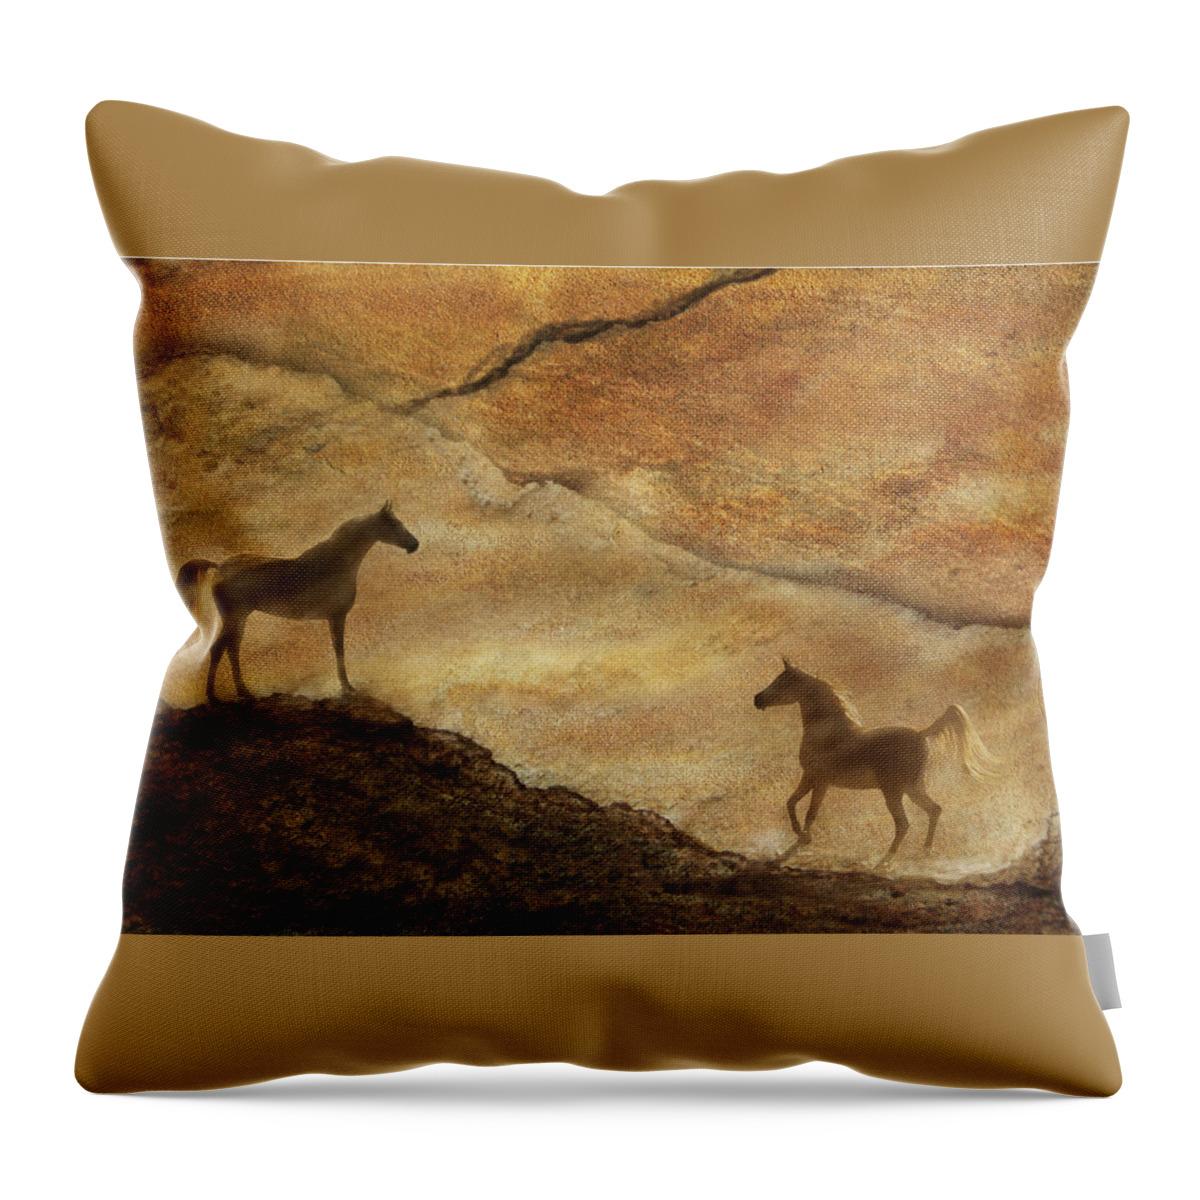 Sand Throw Pillow featuring the photograph Sandstorm by Melinda Hughes-Berland